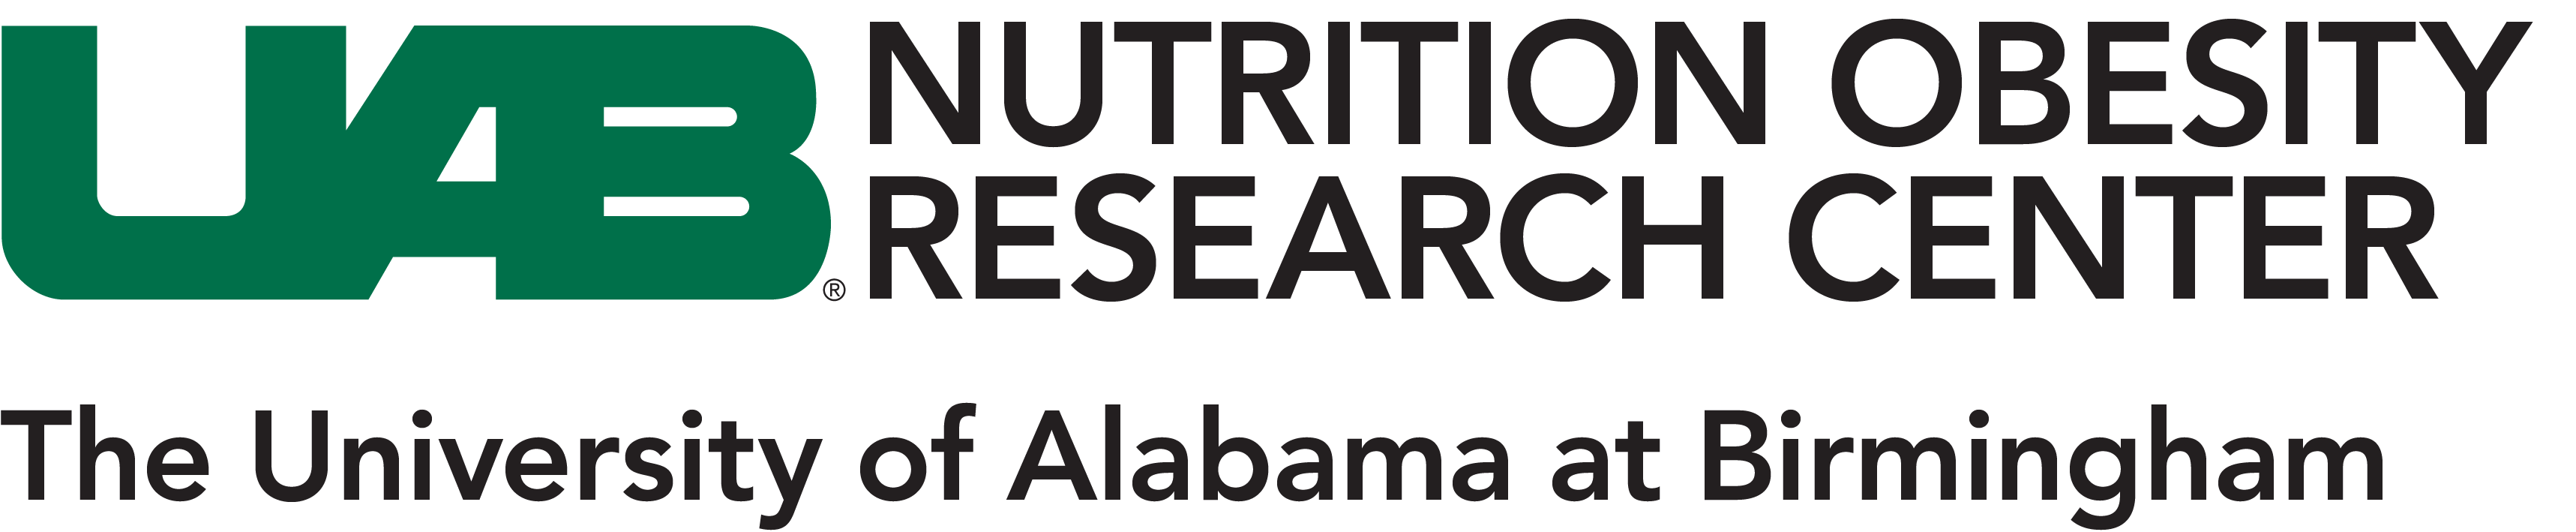 Nutrition Obesity Research Center